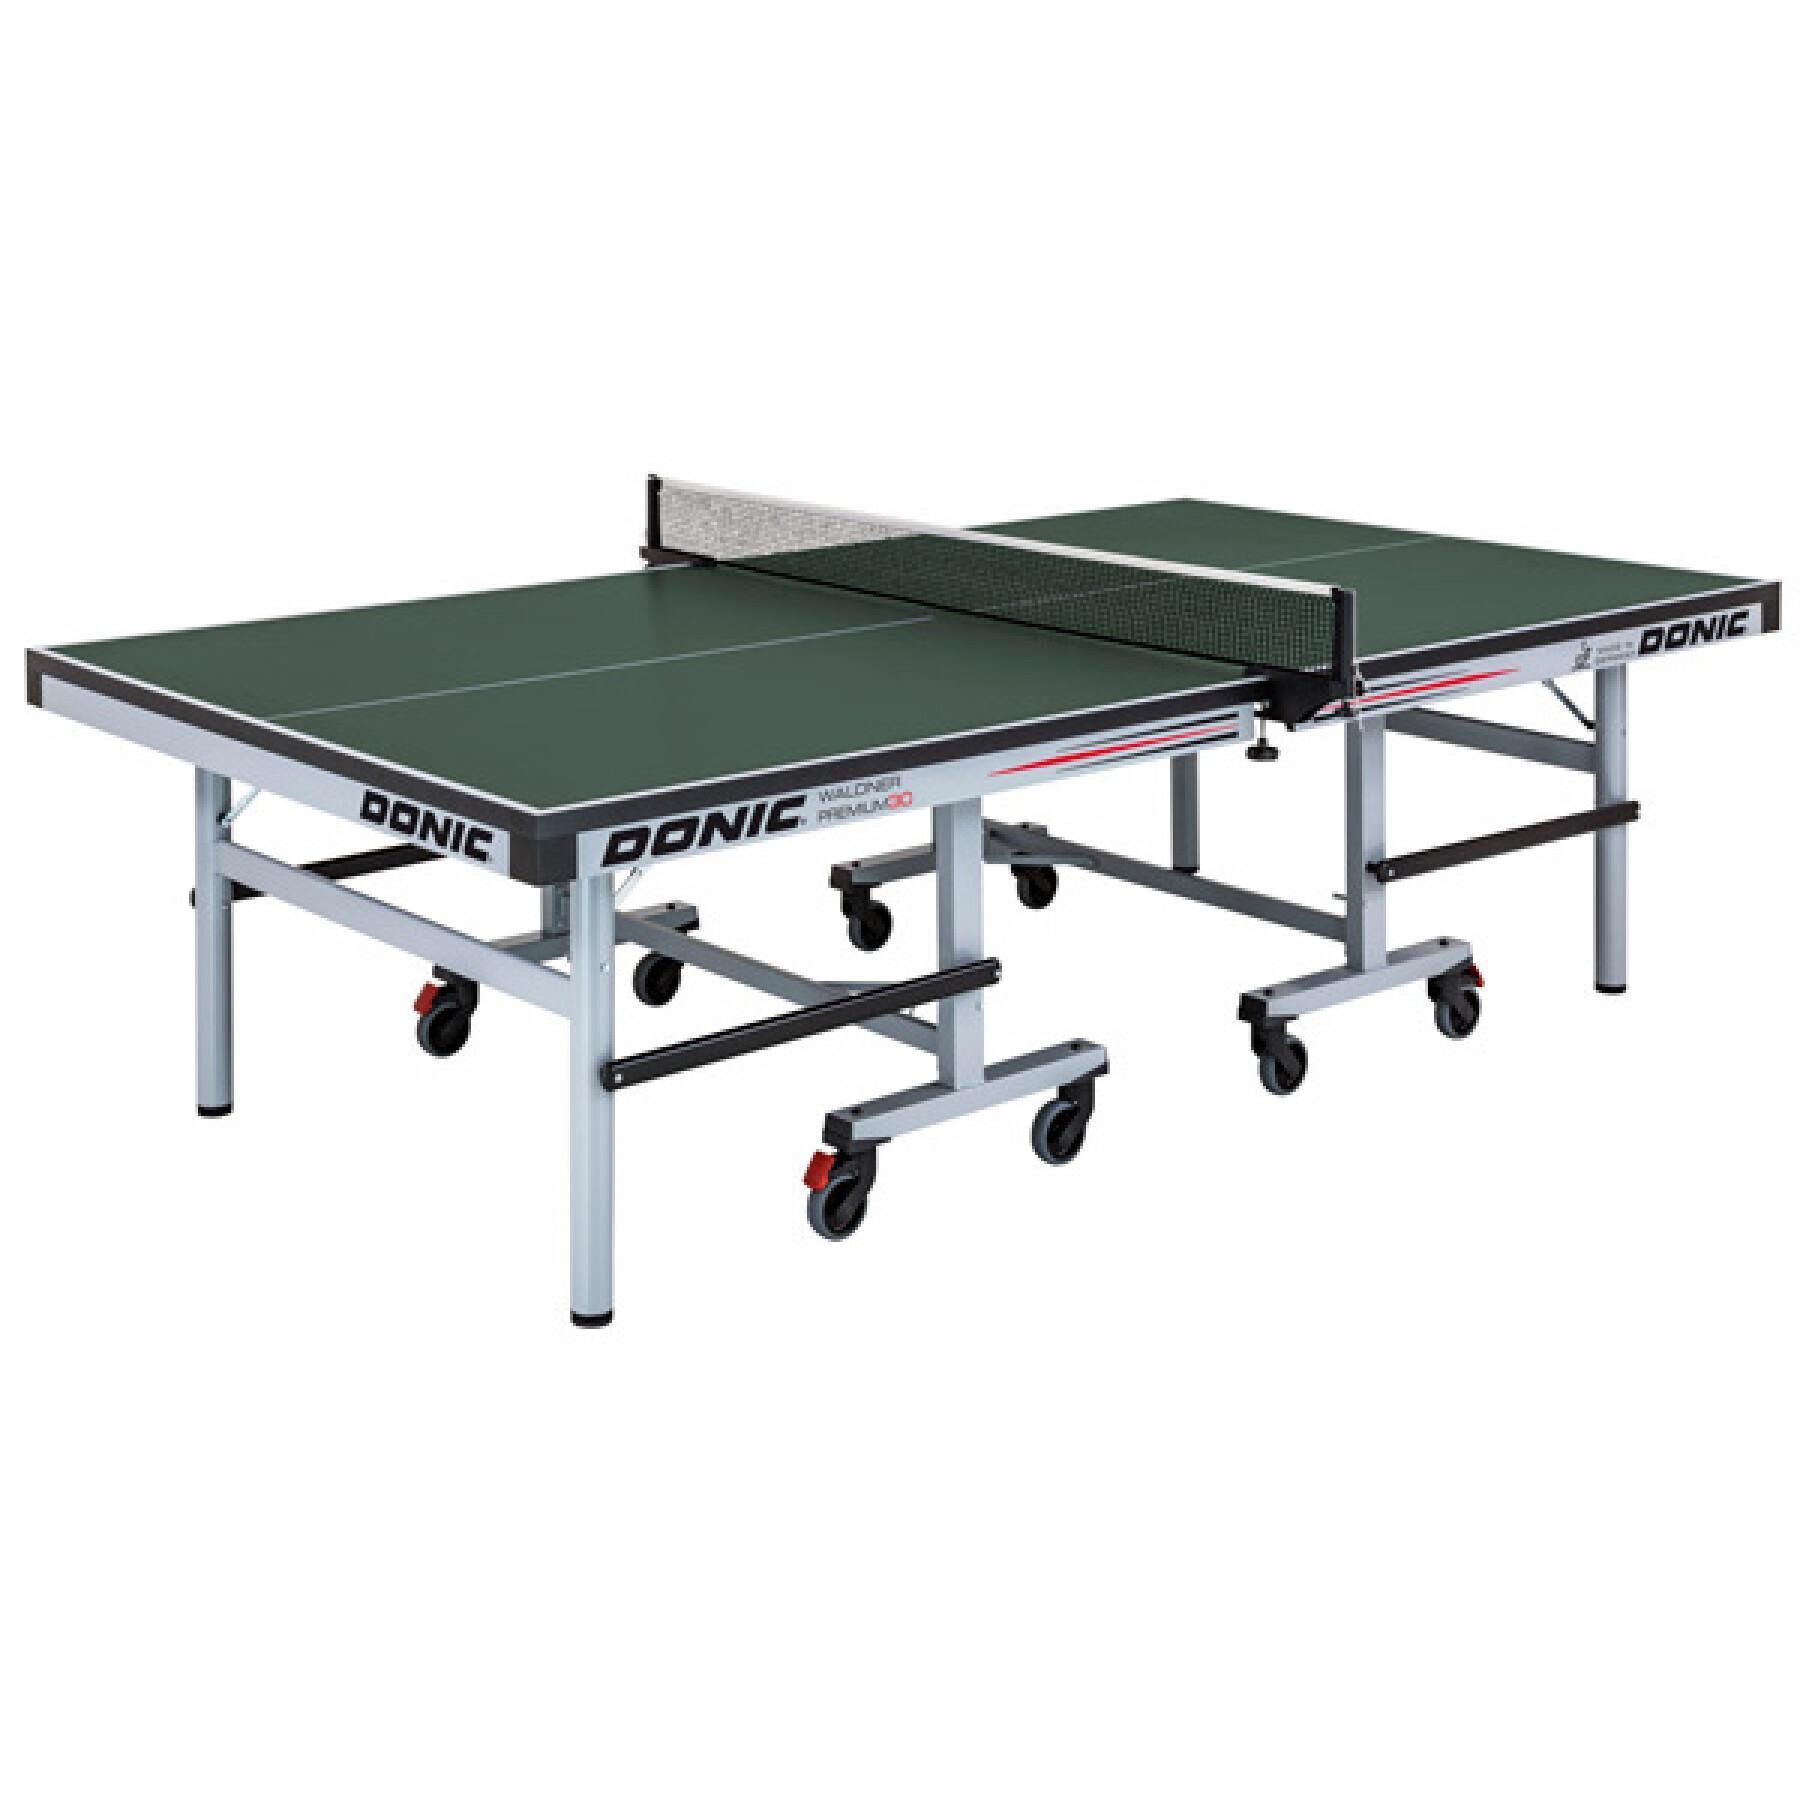 Table tennis table Donic Waldner Premium 30